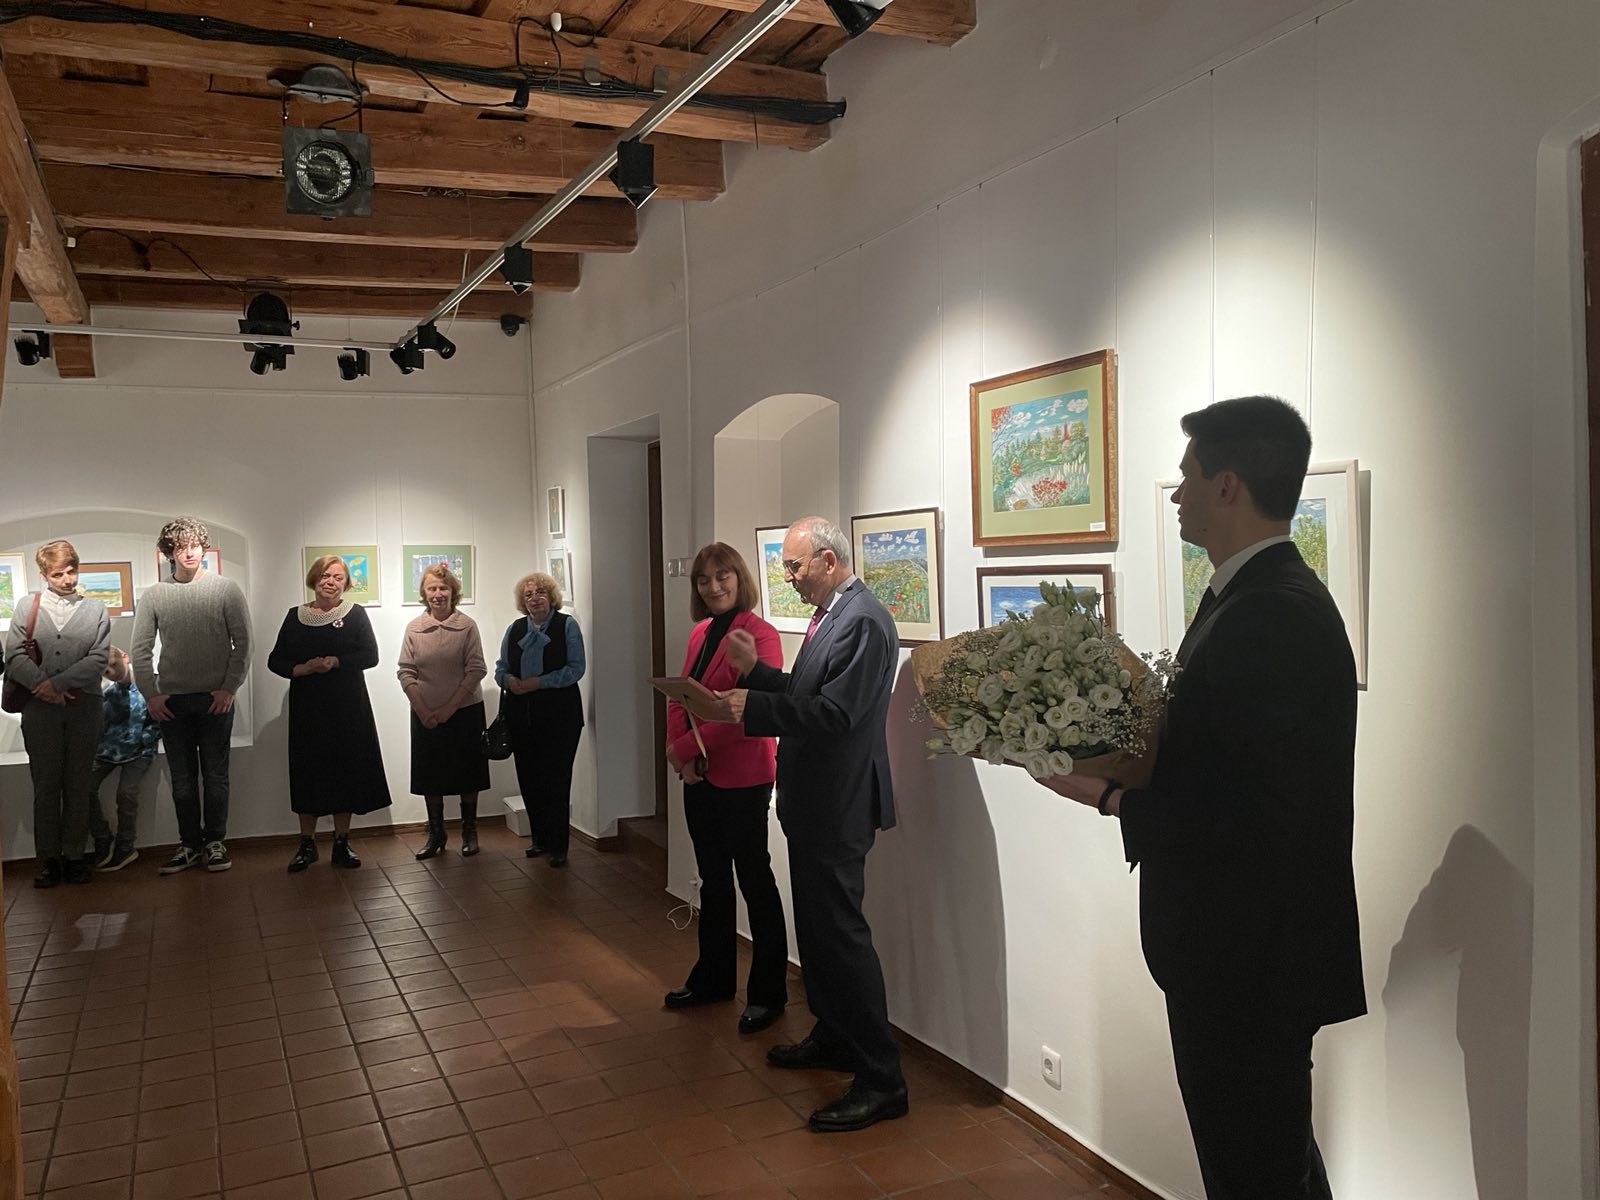 The exhibition „Needle art - in the colors of nature” can be visited by members of our diaspora in Vilnius